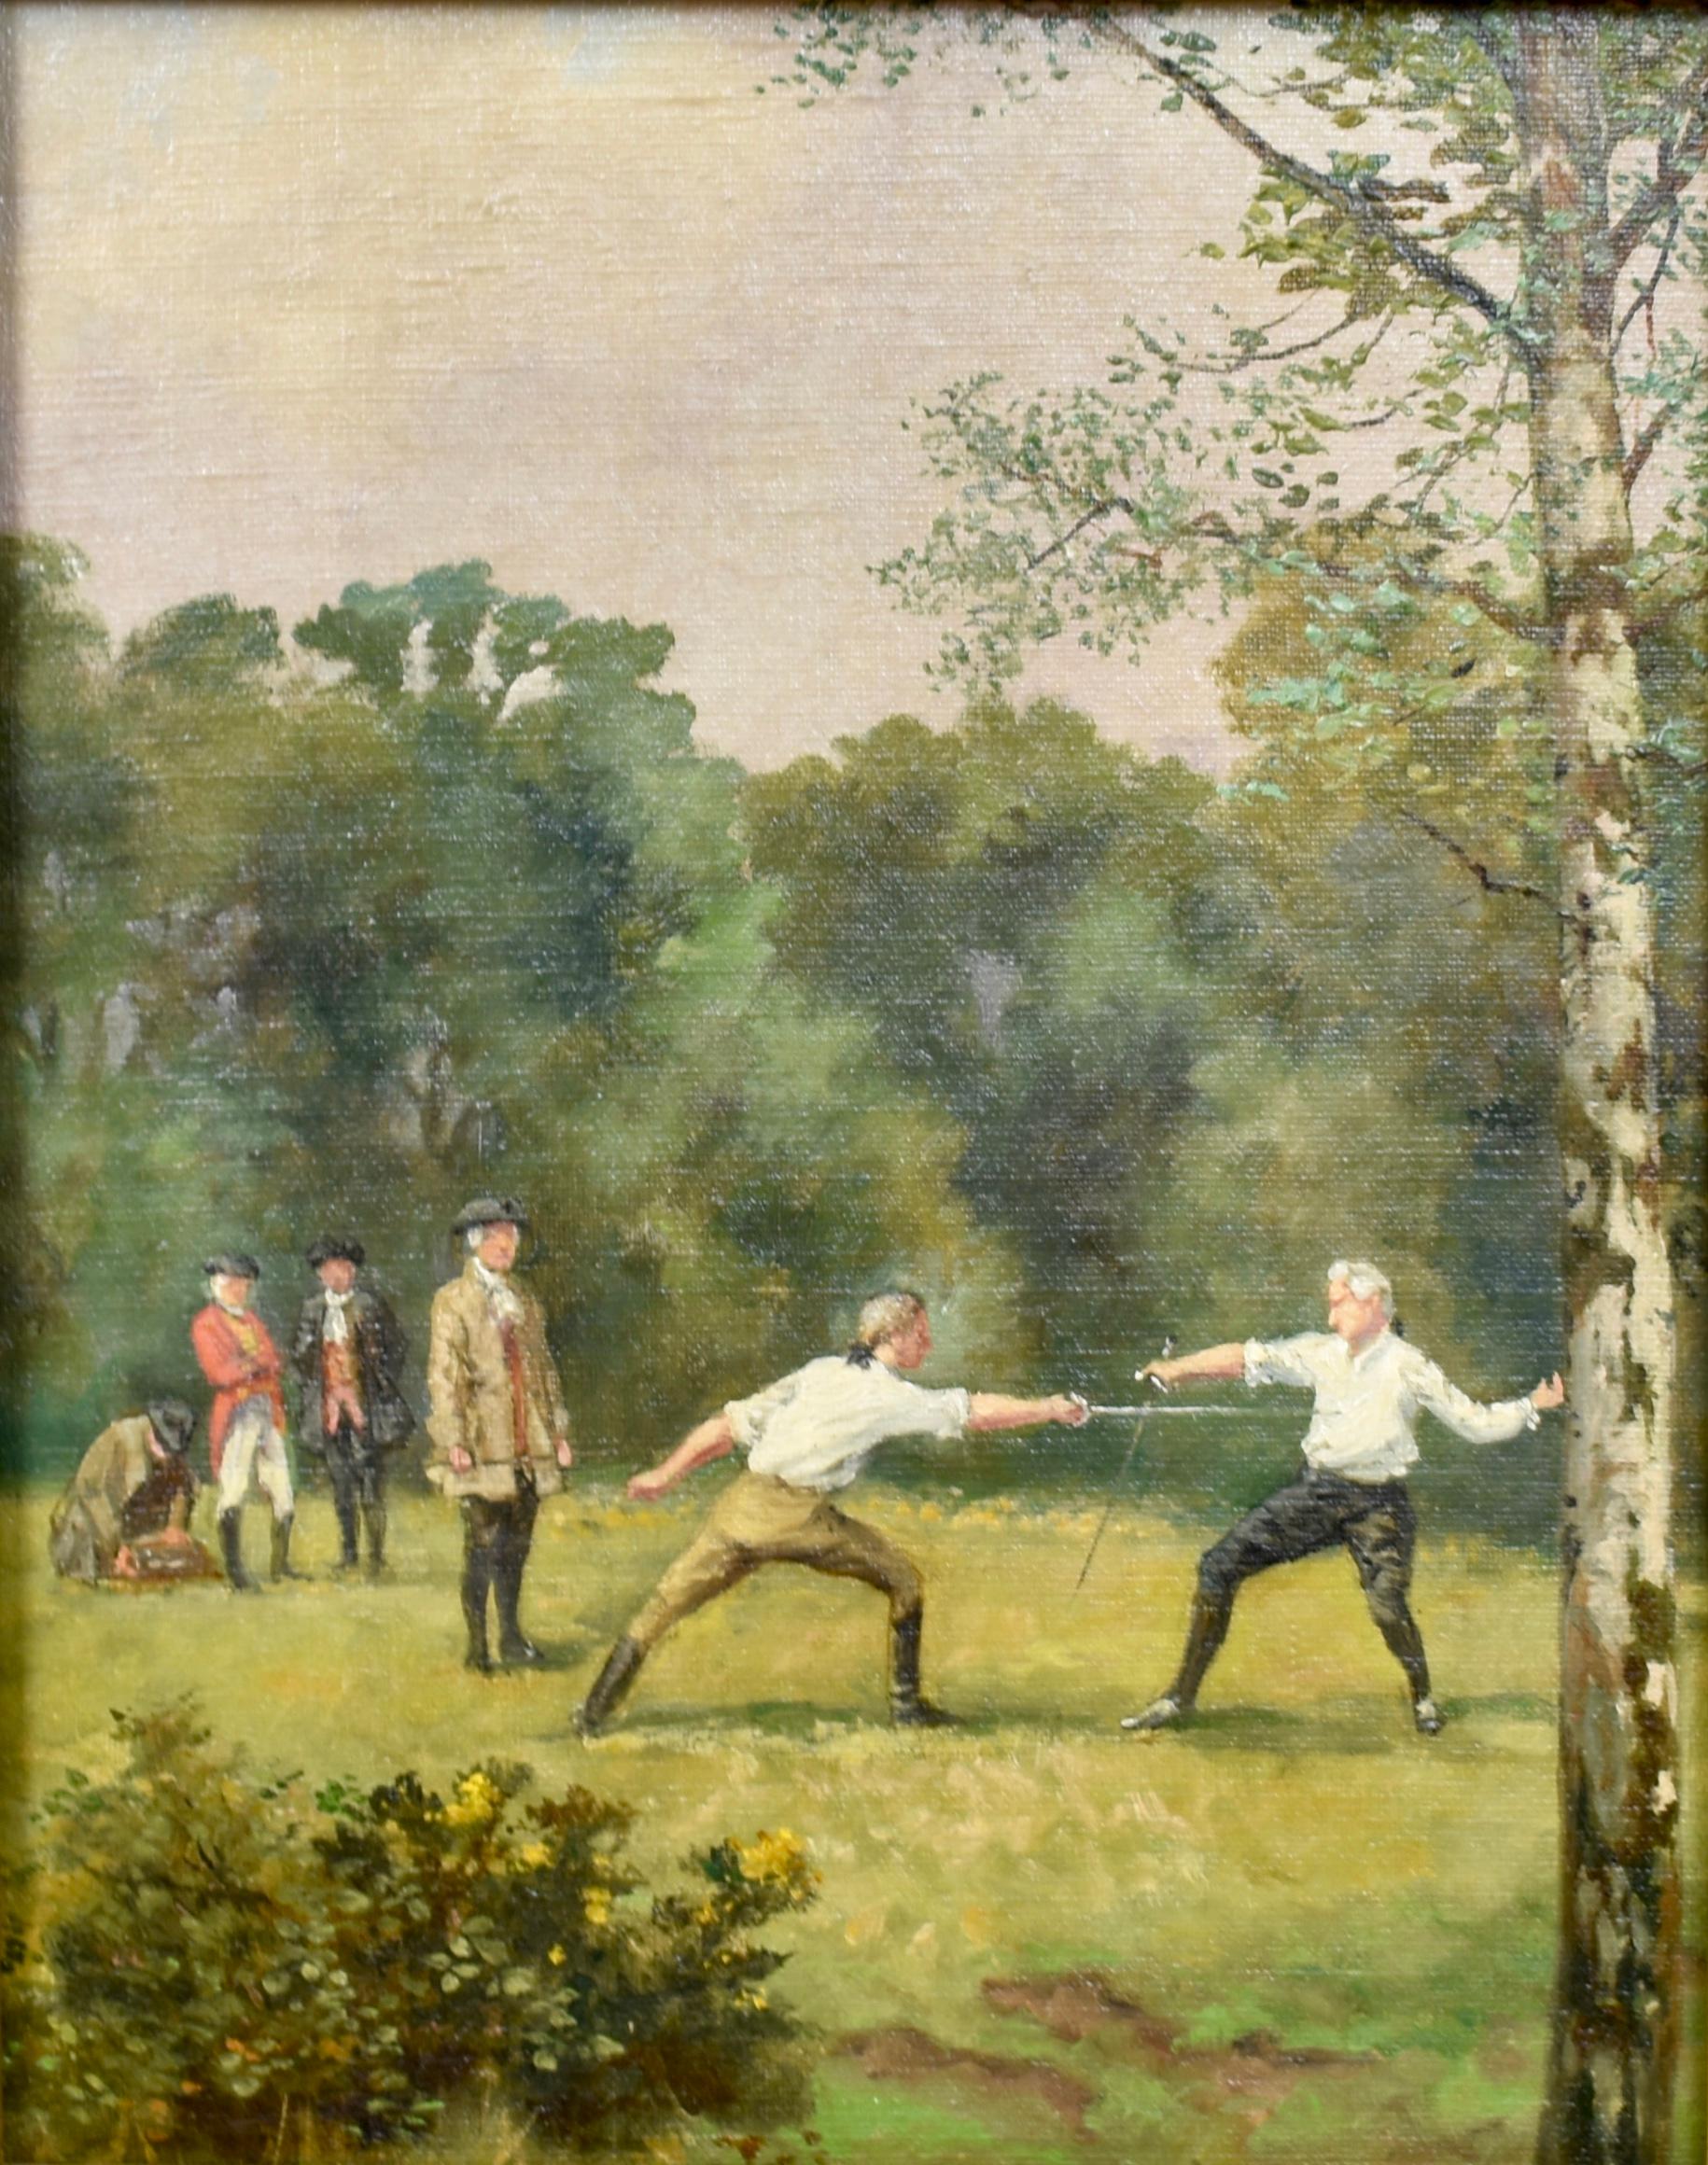 Antique english sporting art painting.  Oil on canvas, circa 1890.  Signed on a piece of canvas verso.  Oil on canvas, lain on board.  Displayed in a giltwood frame.  Image size, 9.5